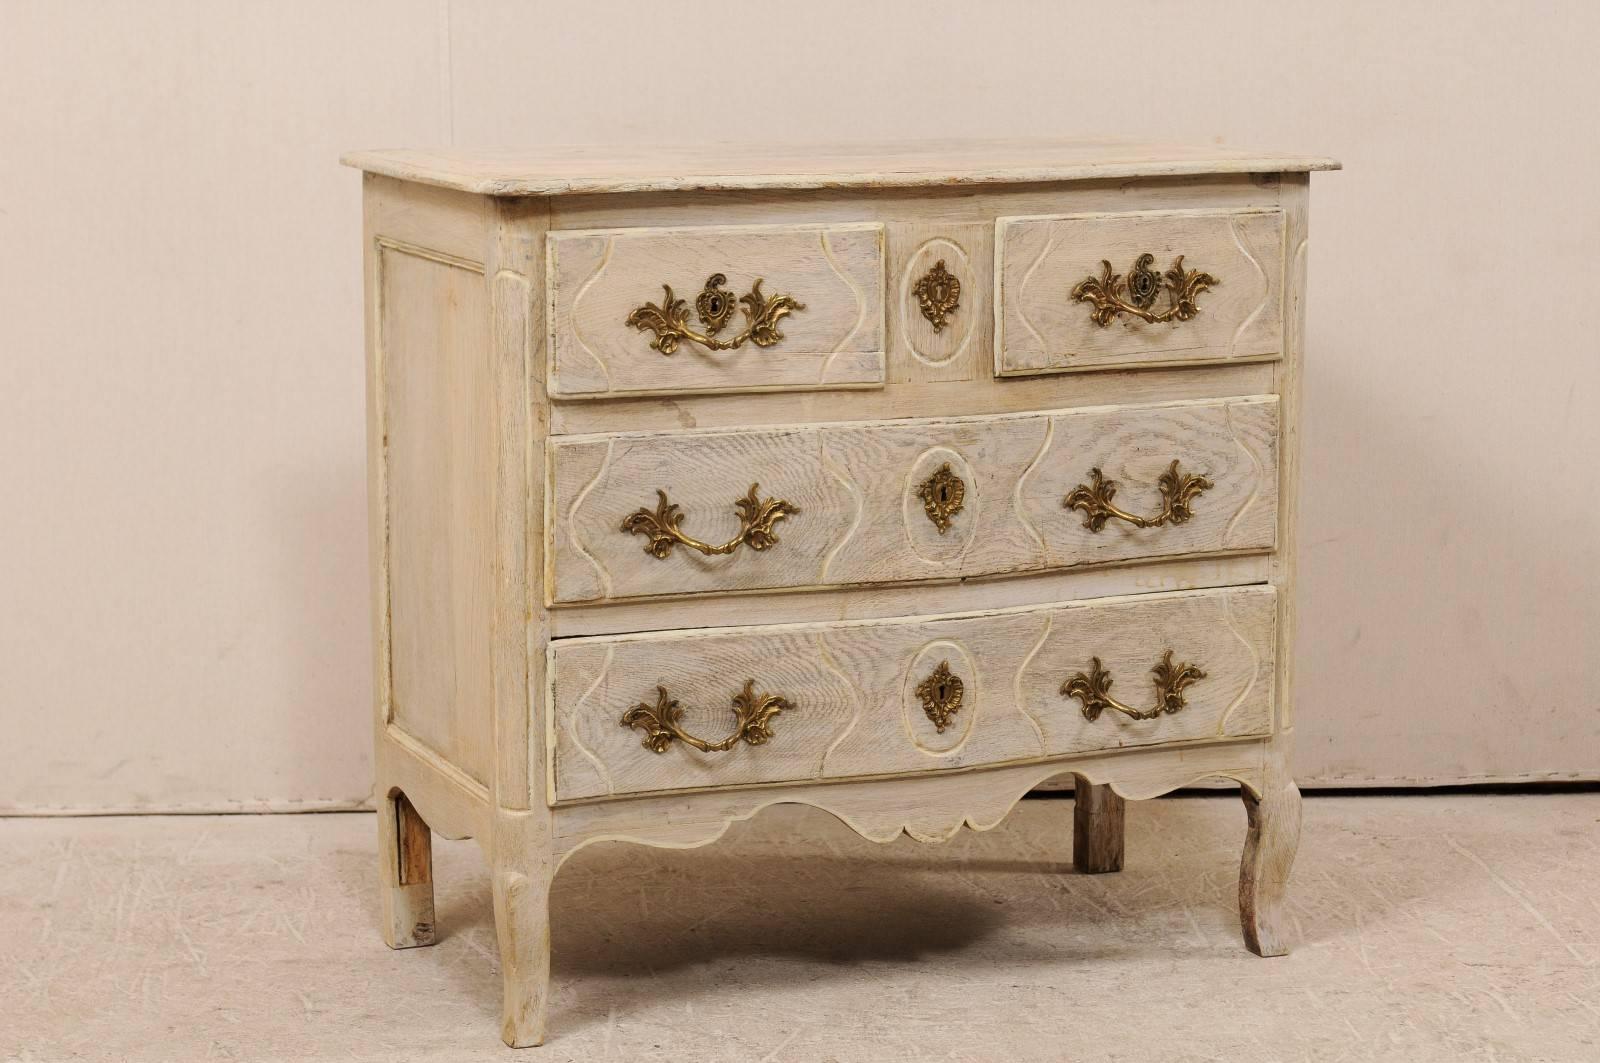 A French mid-19th century wood chest. This 19th century French commode features two smaller drawers over two larger drawers. Each drawer features Rococo style hardware. The front and drawers are lightly carved, in a fluidly zig-zag down the front of